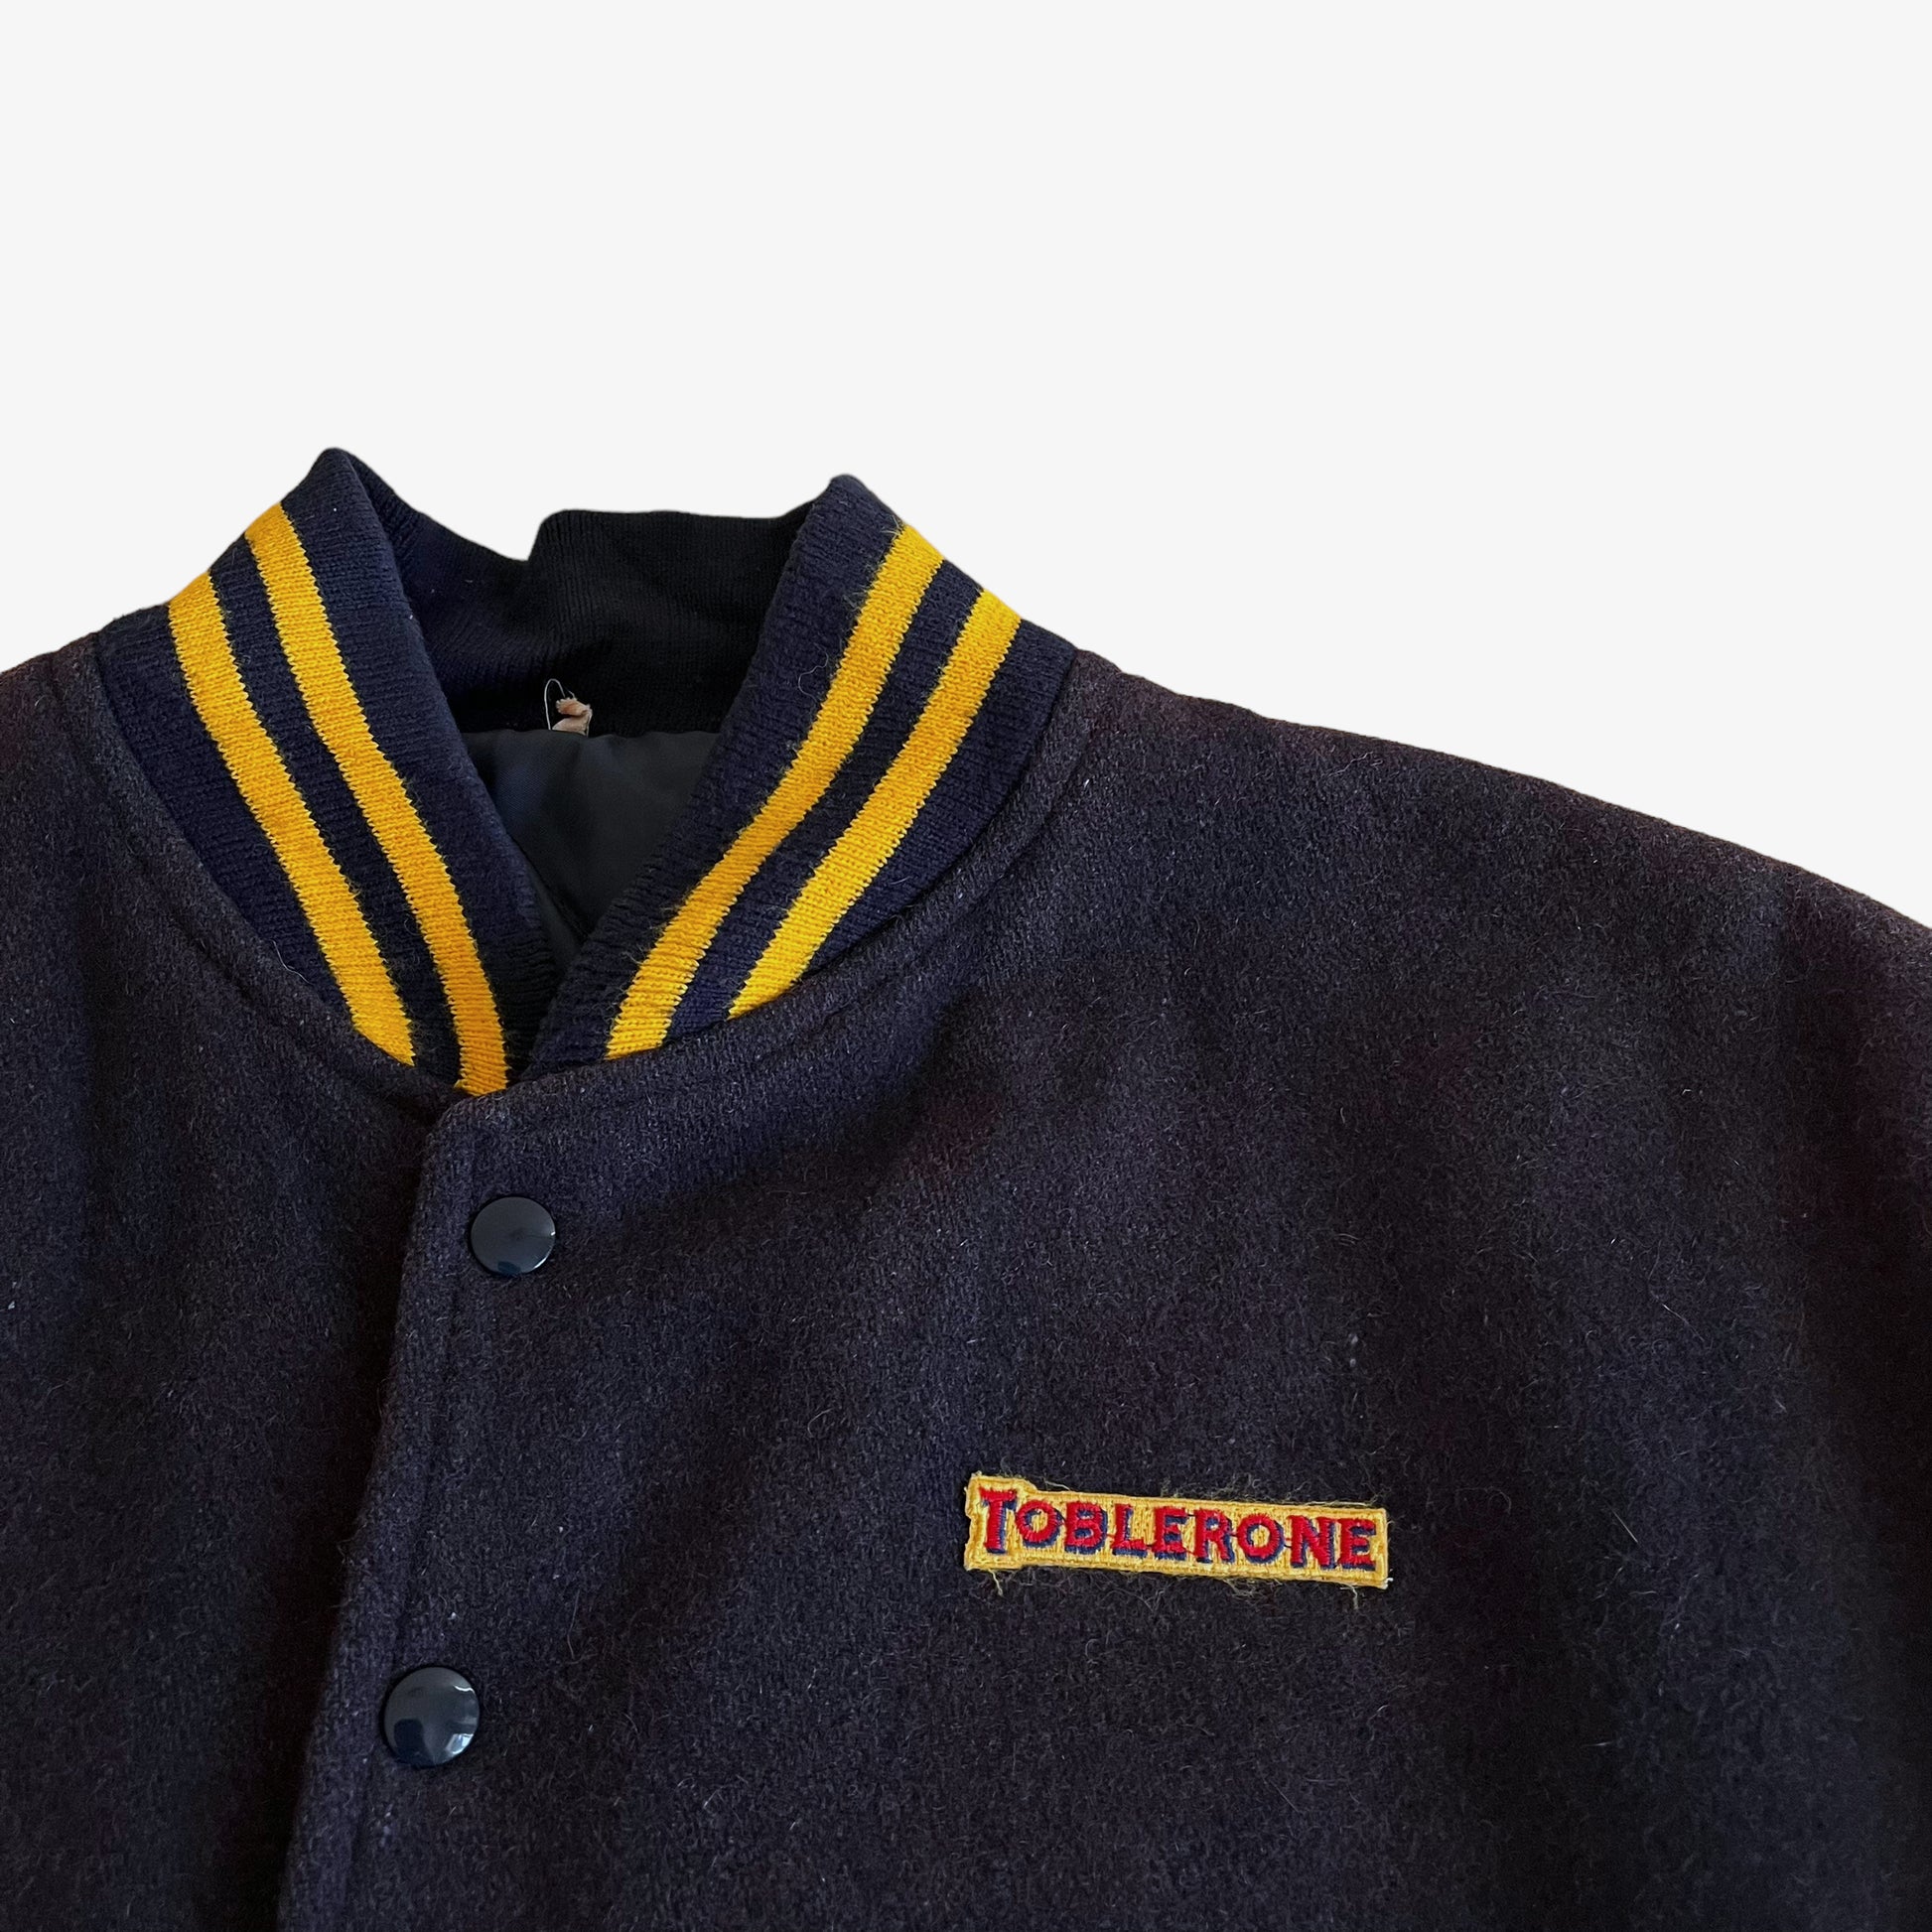 Vintage 90s Toblerone Varsity Jacket With Sleeve Spell Out Logo - Casspios Dream